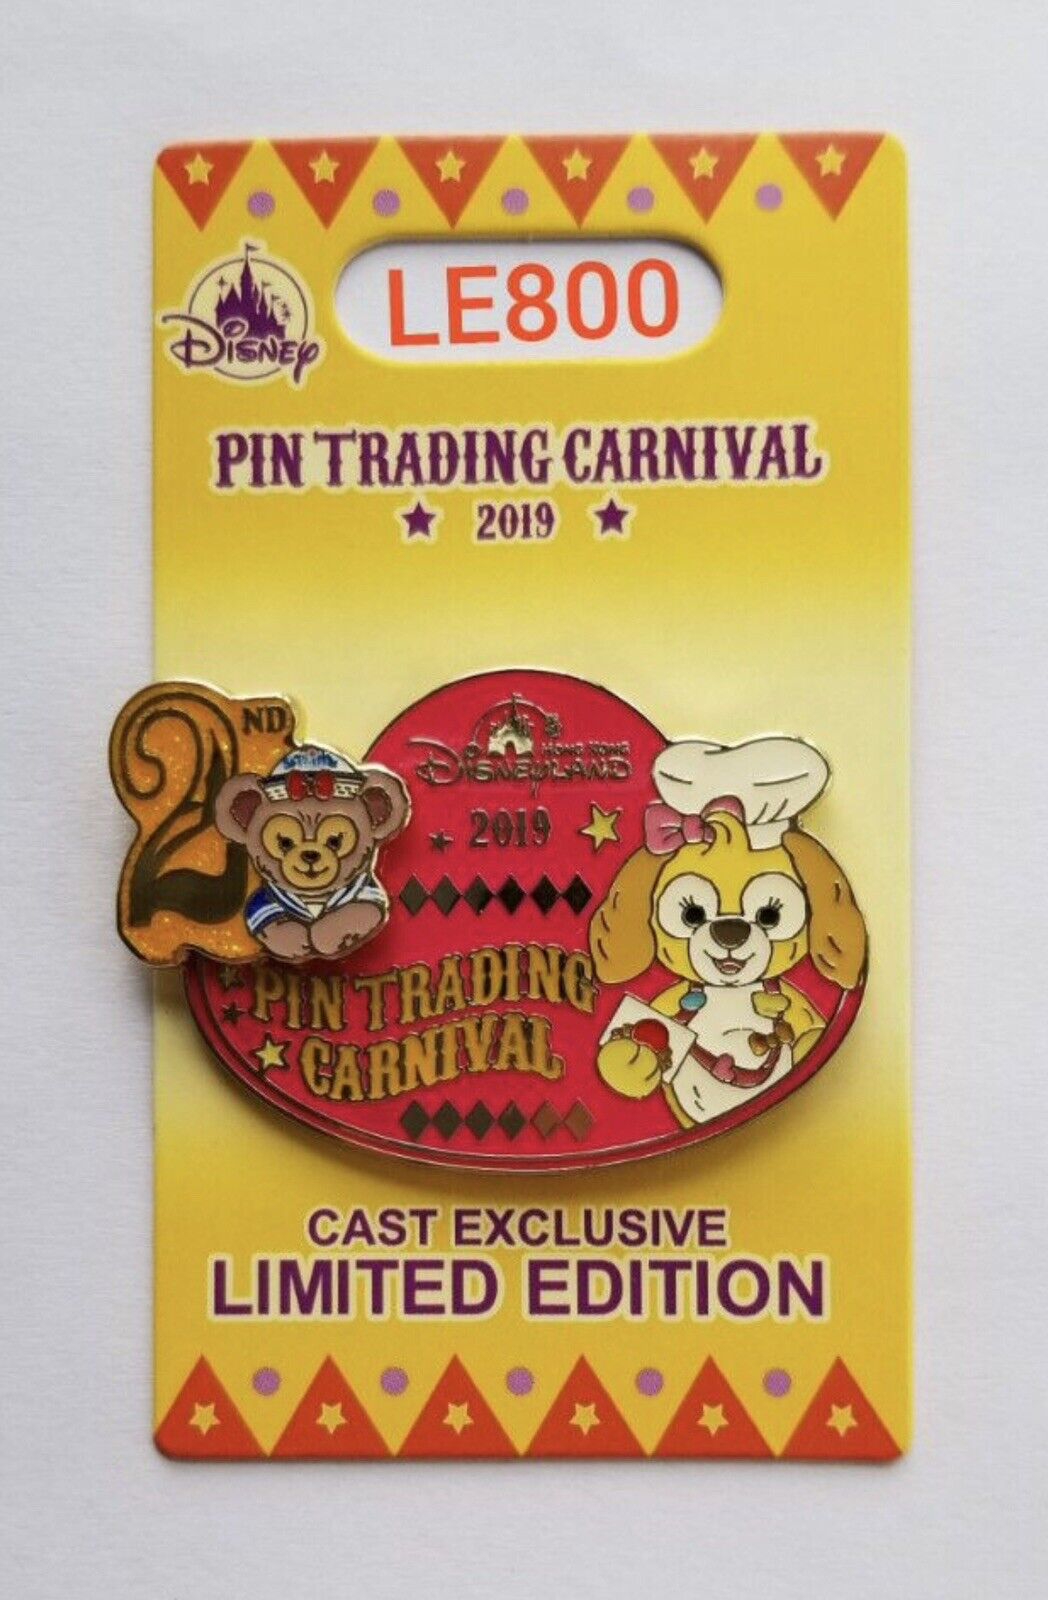 Disney HKDL Pin Trading Carnival 2019 Cookie Ann Duffy LE 800 Cast Exclusive New